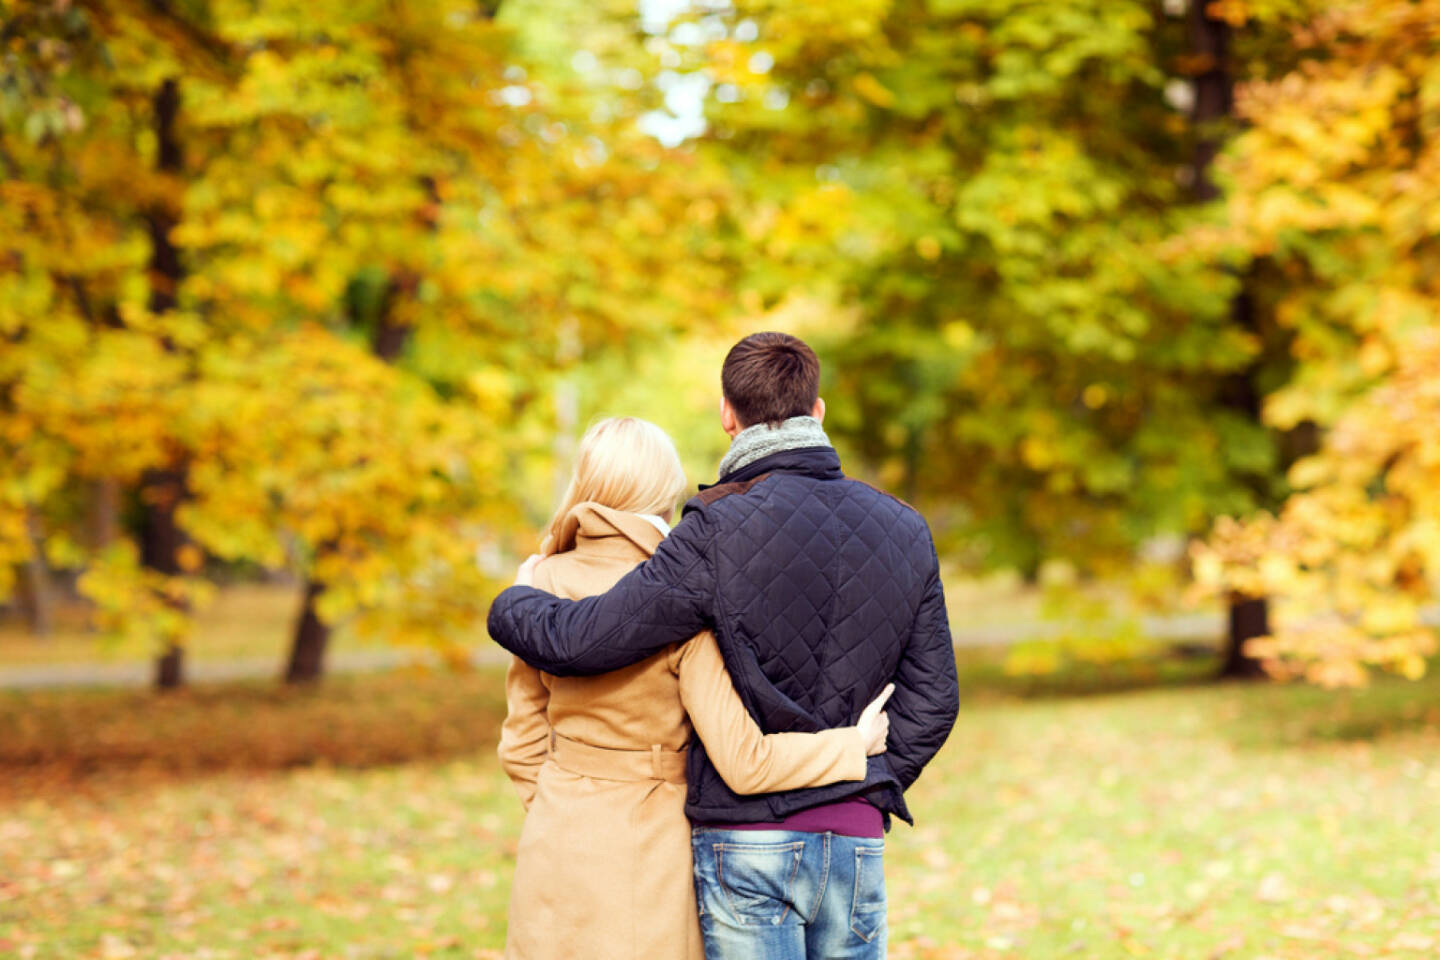 Umarmung, Paar, Spaziergang, Herbst, http://www.shutterstock.com/de/pic-217933690/stock-photo-love-relationship-family-and-people-concept-couple-hugging-in-autumn-park-from-back.html